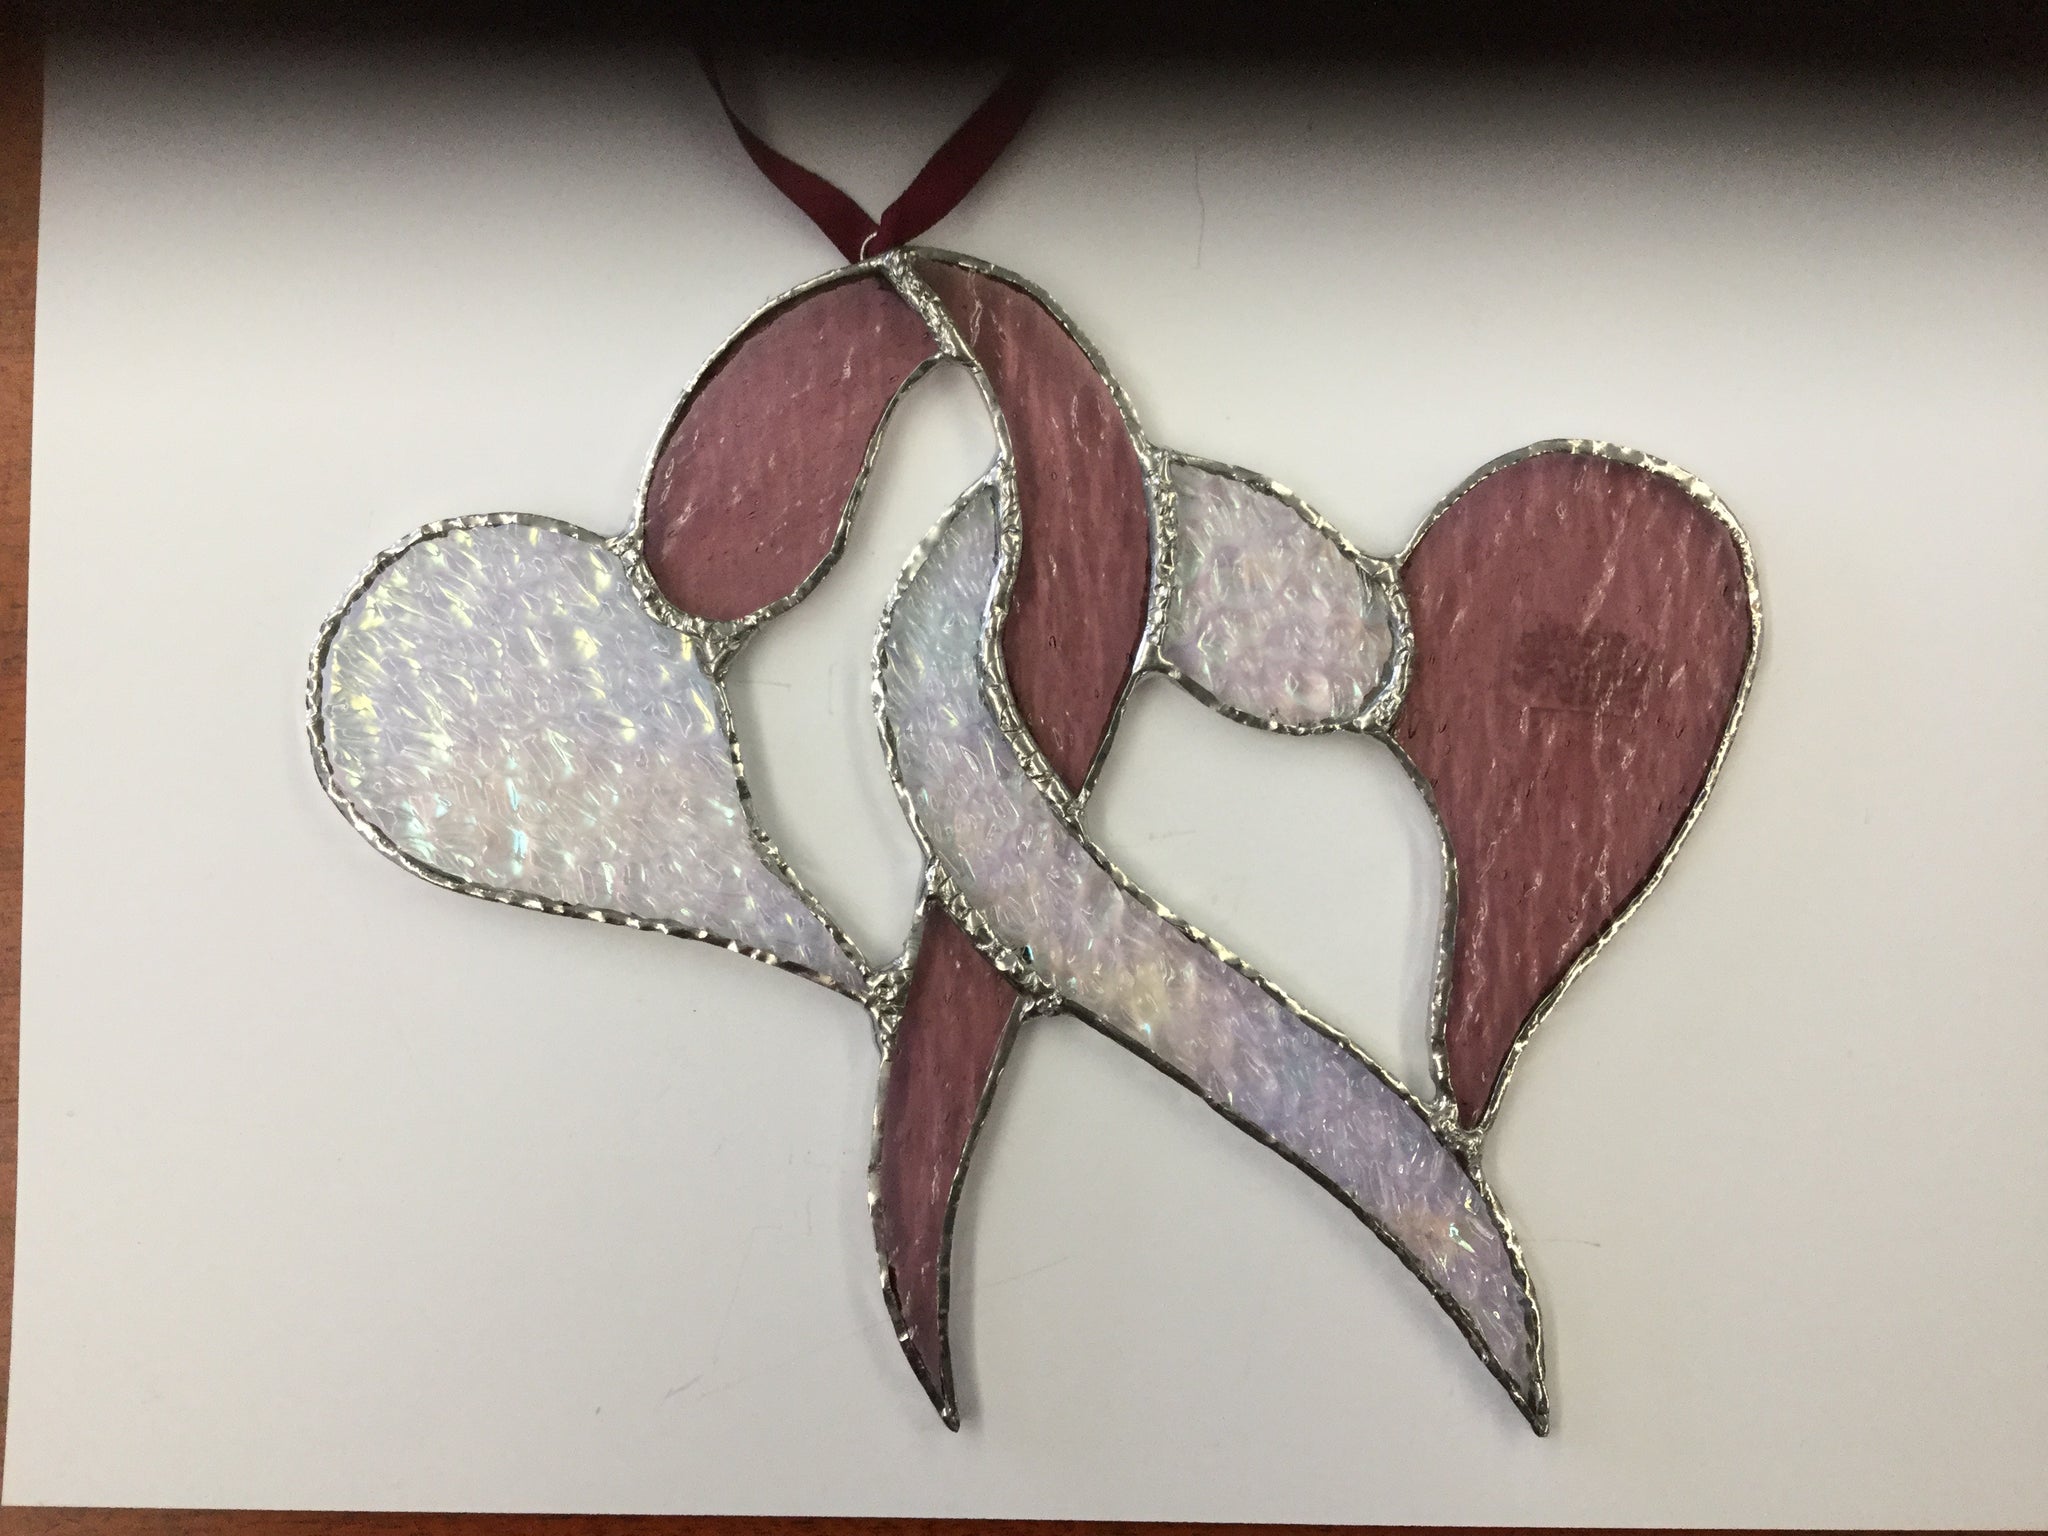 Enwined hearts stained glass by Cheryl Olafson